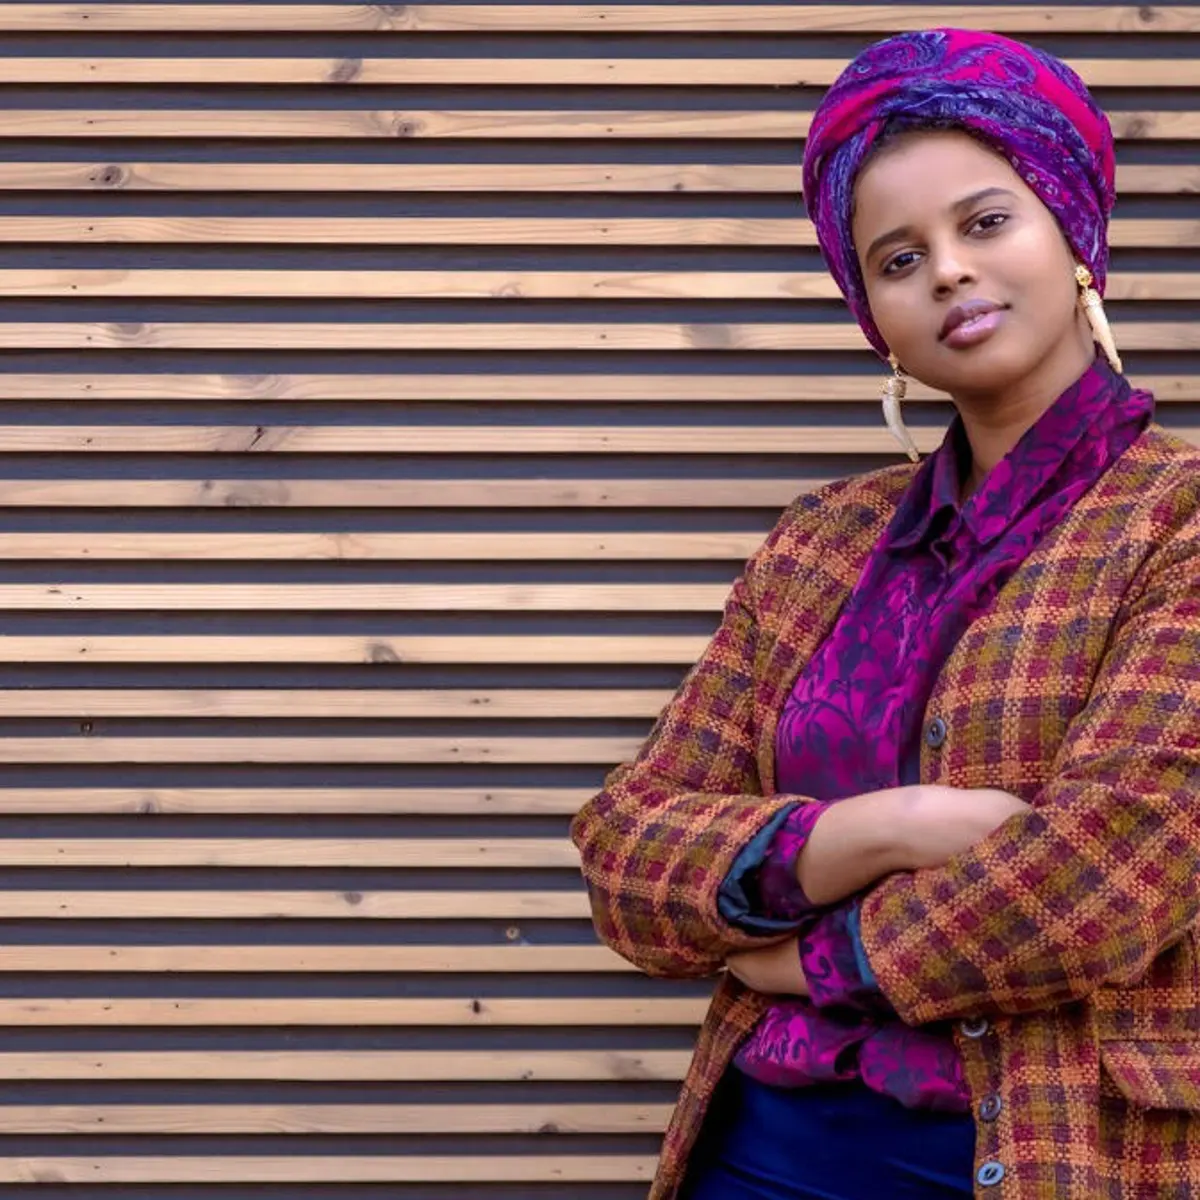 A photo of [Momtaza Mehri] in a patterned blazer and headscarf, arms crossed, against horizontal wood background.  